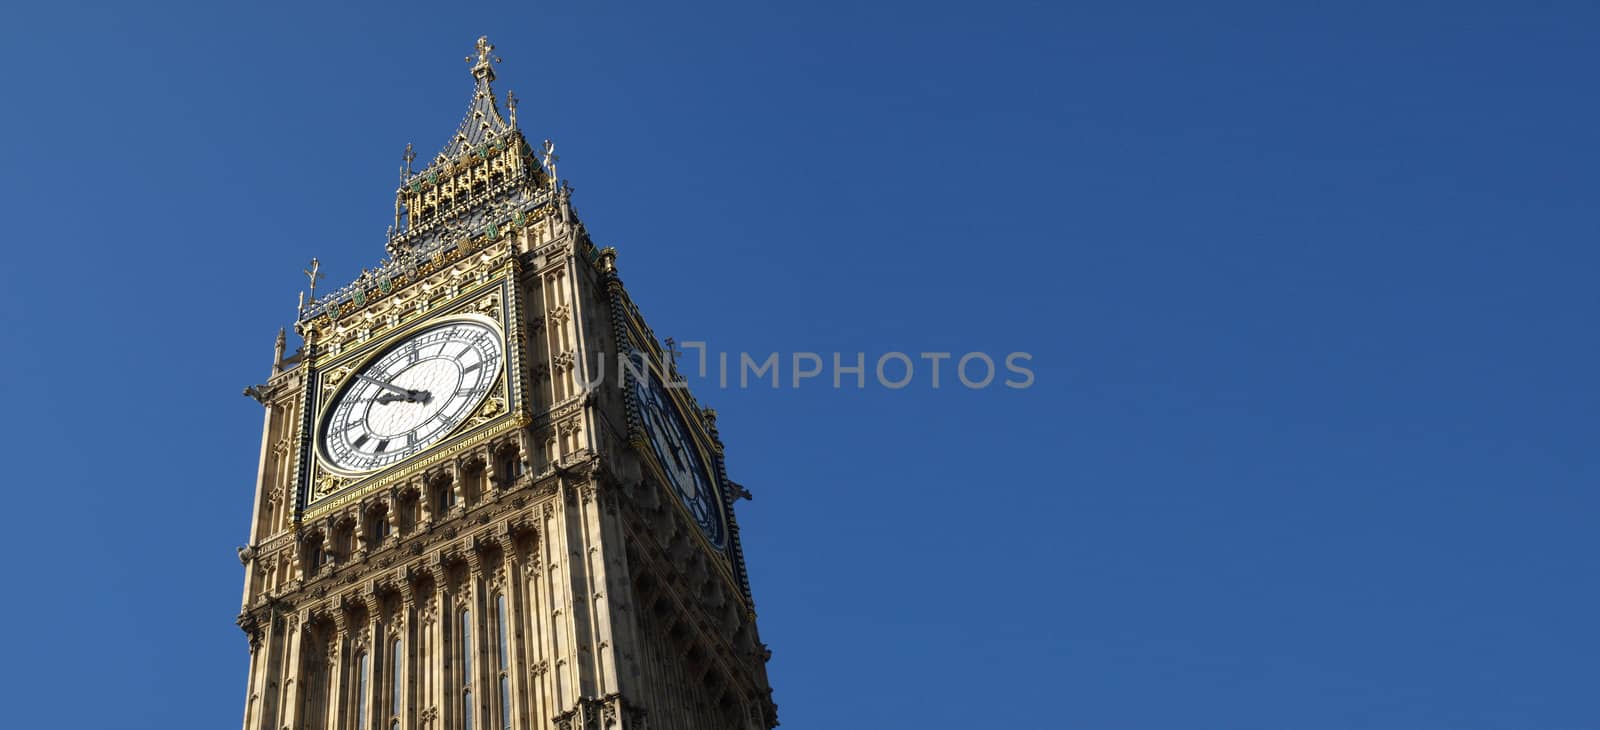 Big Ben at the Houses of Parliament, Westminster Palace, London, UK - with copyspace